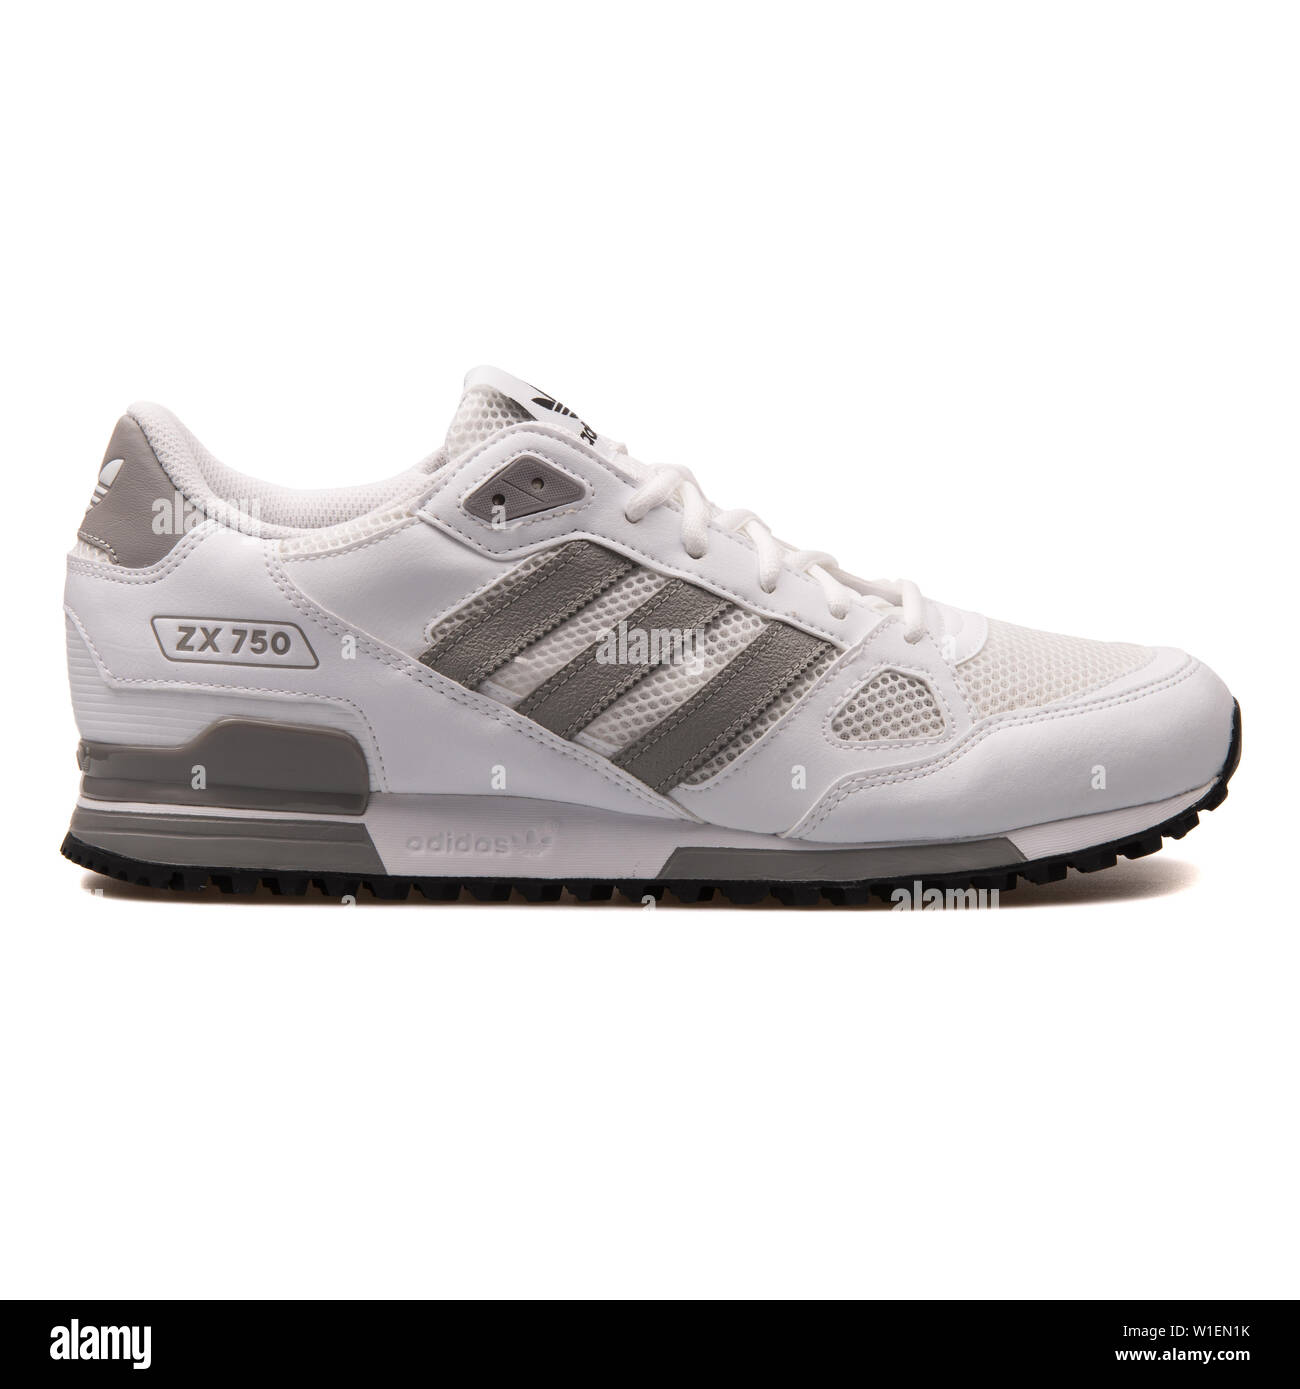 Adidas ZX 750 white and grey sneaker on 